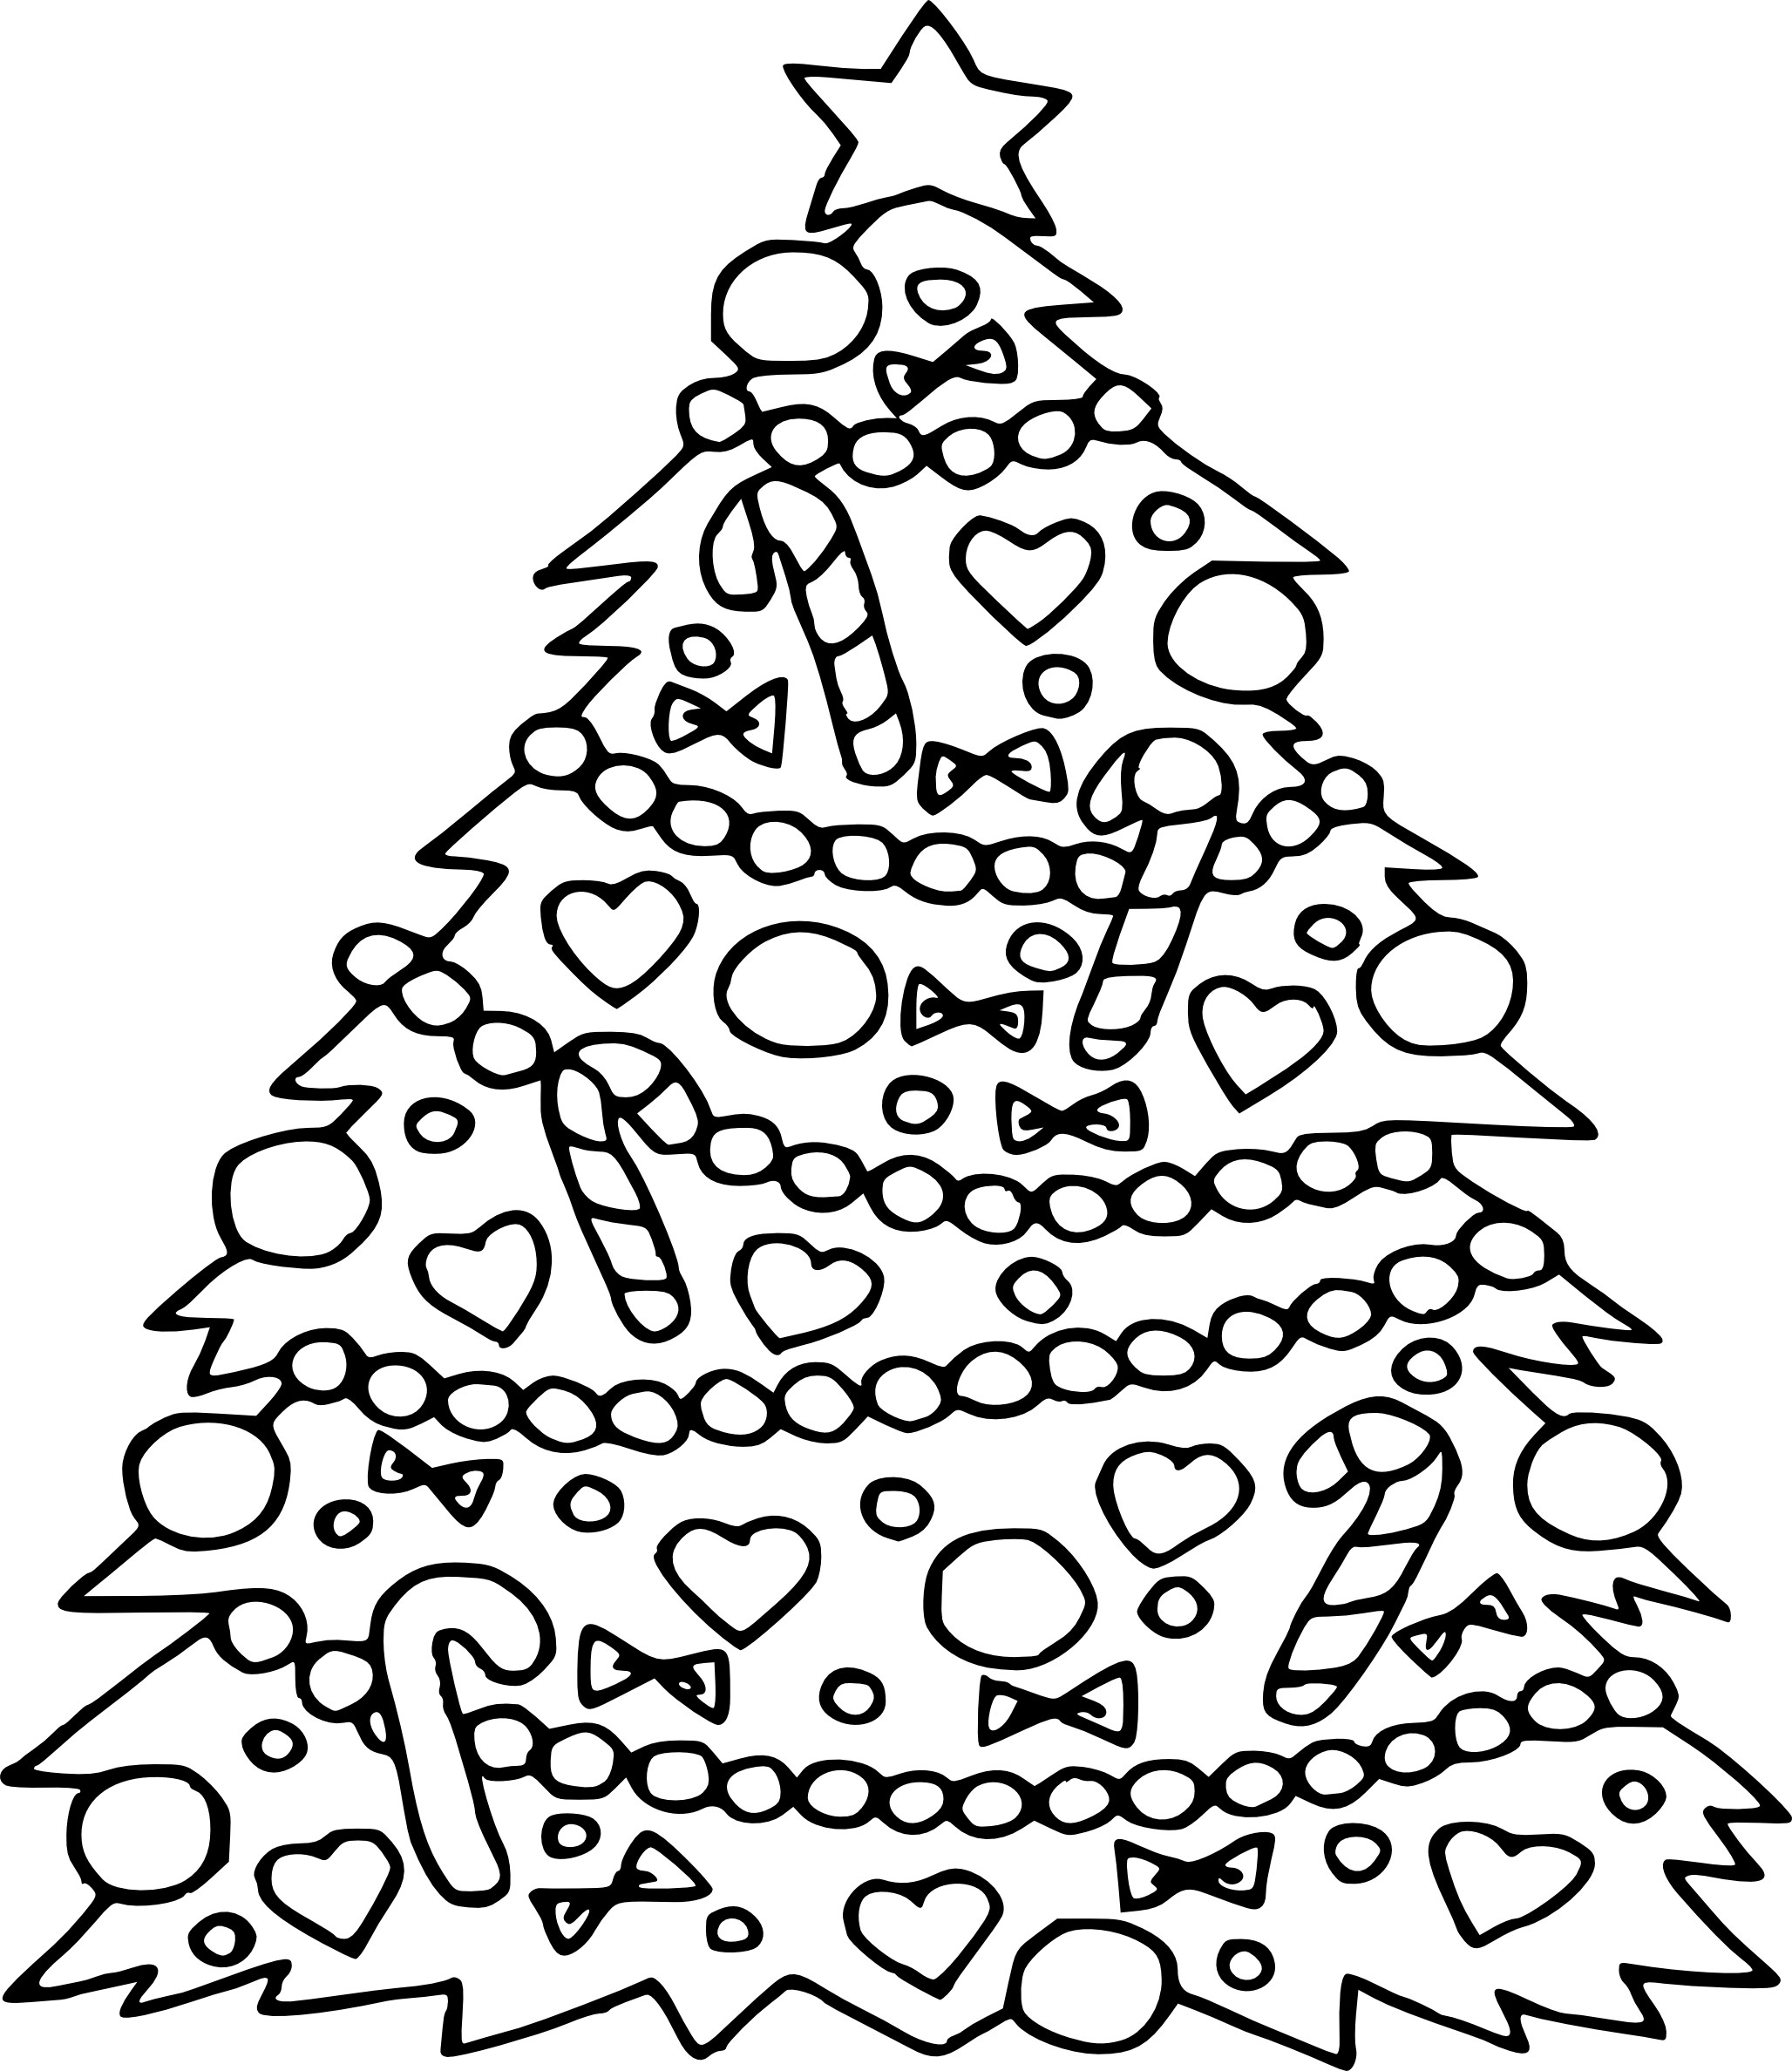 Christmas Tree Coloring Pages Free
 Christmas Tree Coloring Pages Printable Qqa Free Free